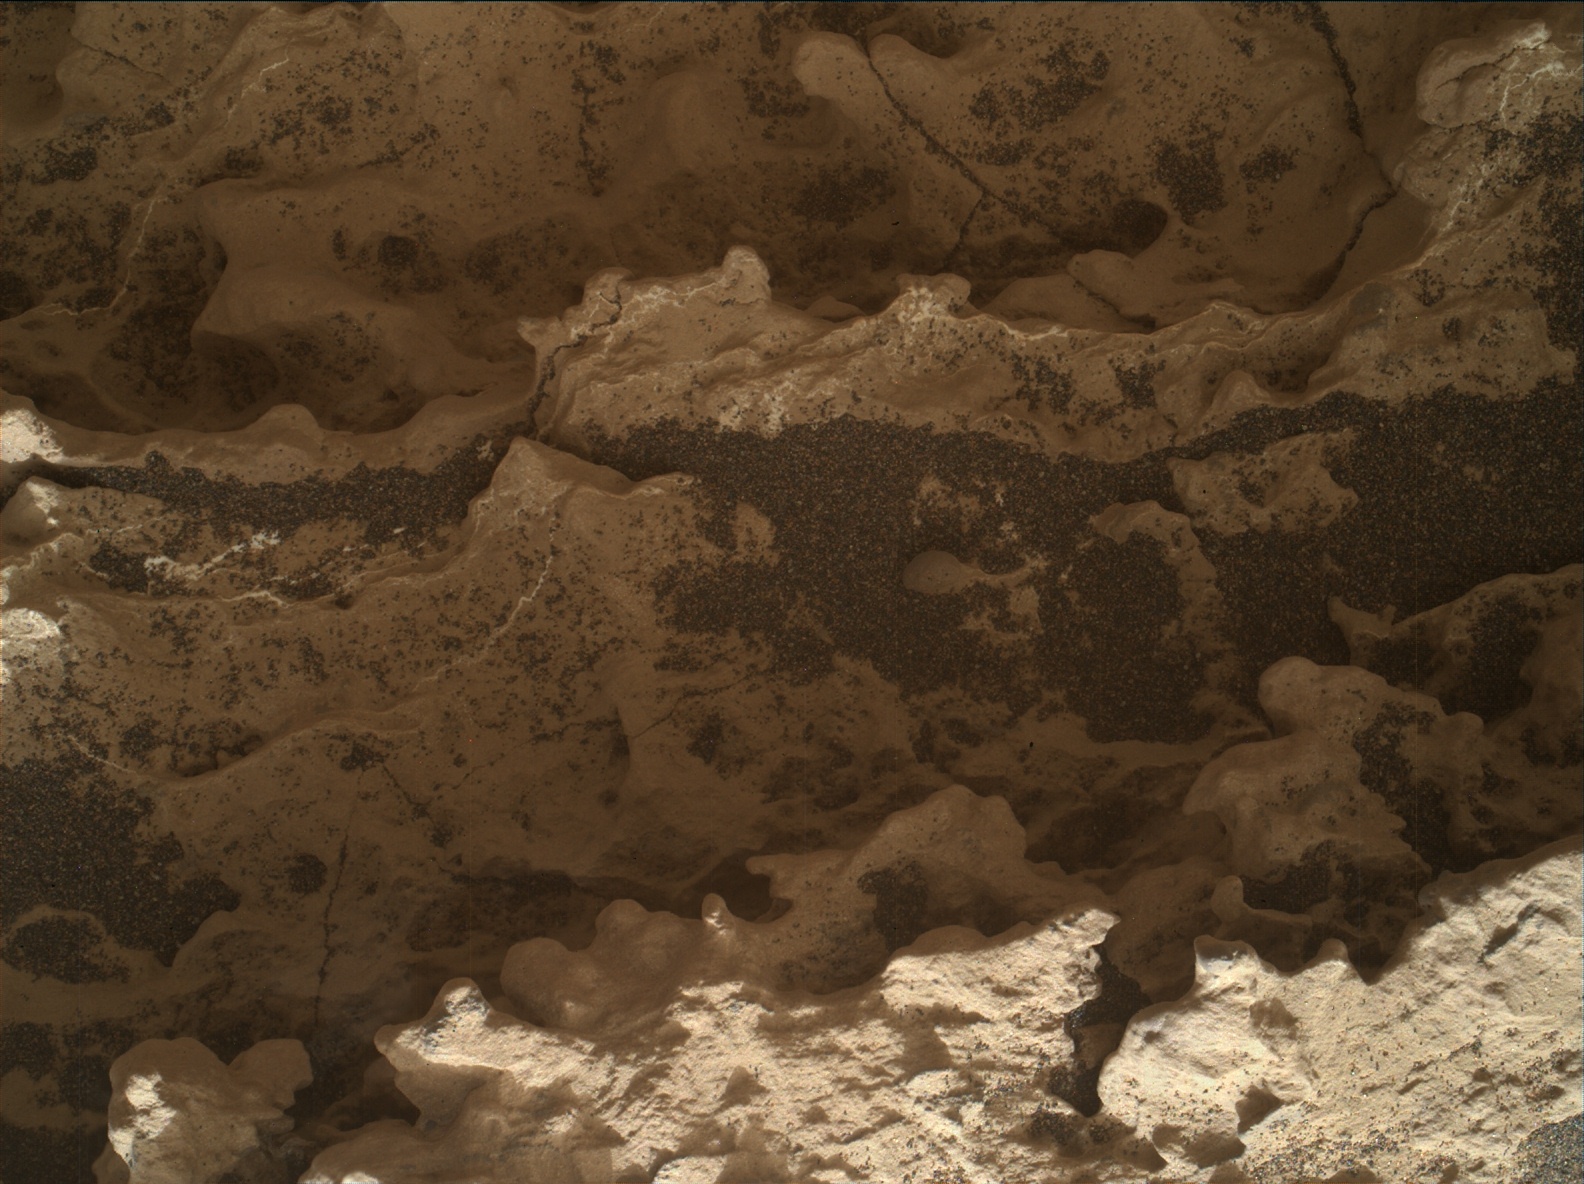 Nasa's Mars rover Curiosity acquired this image using its Mars Hand Lens Imager (MAHLI) on Sol 1675